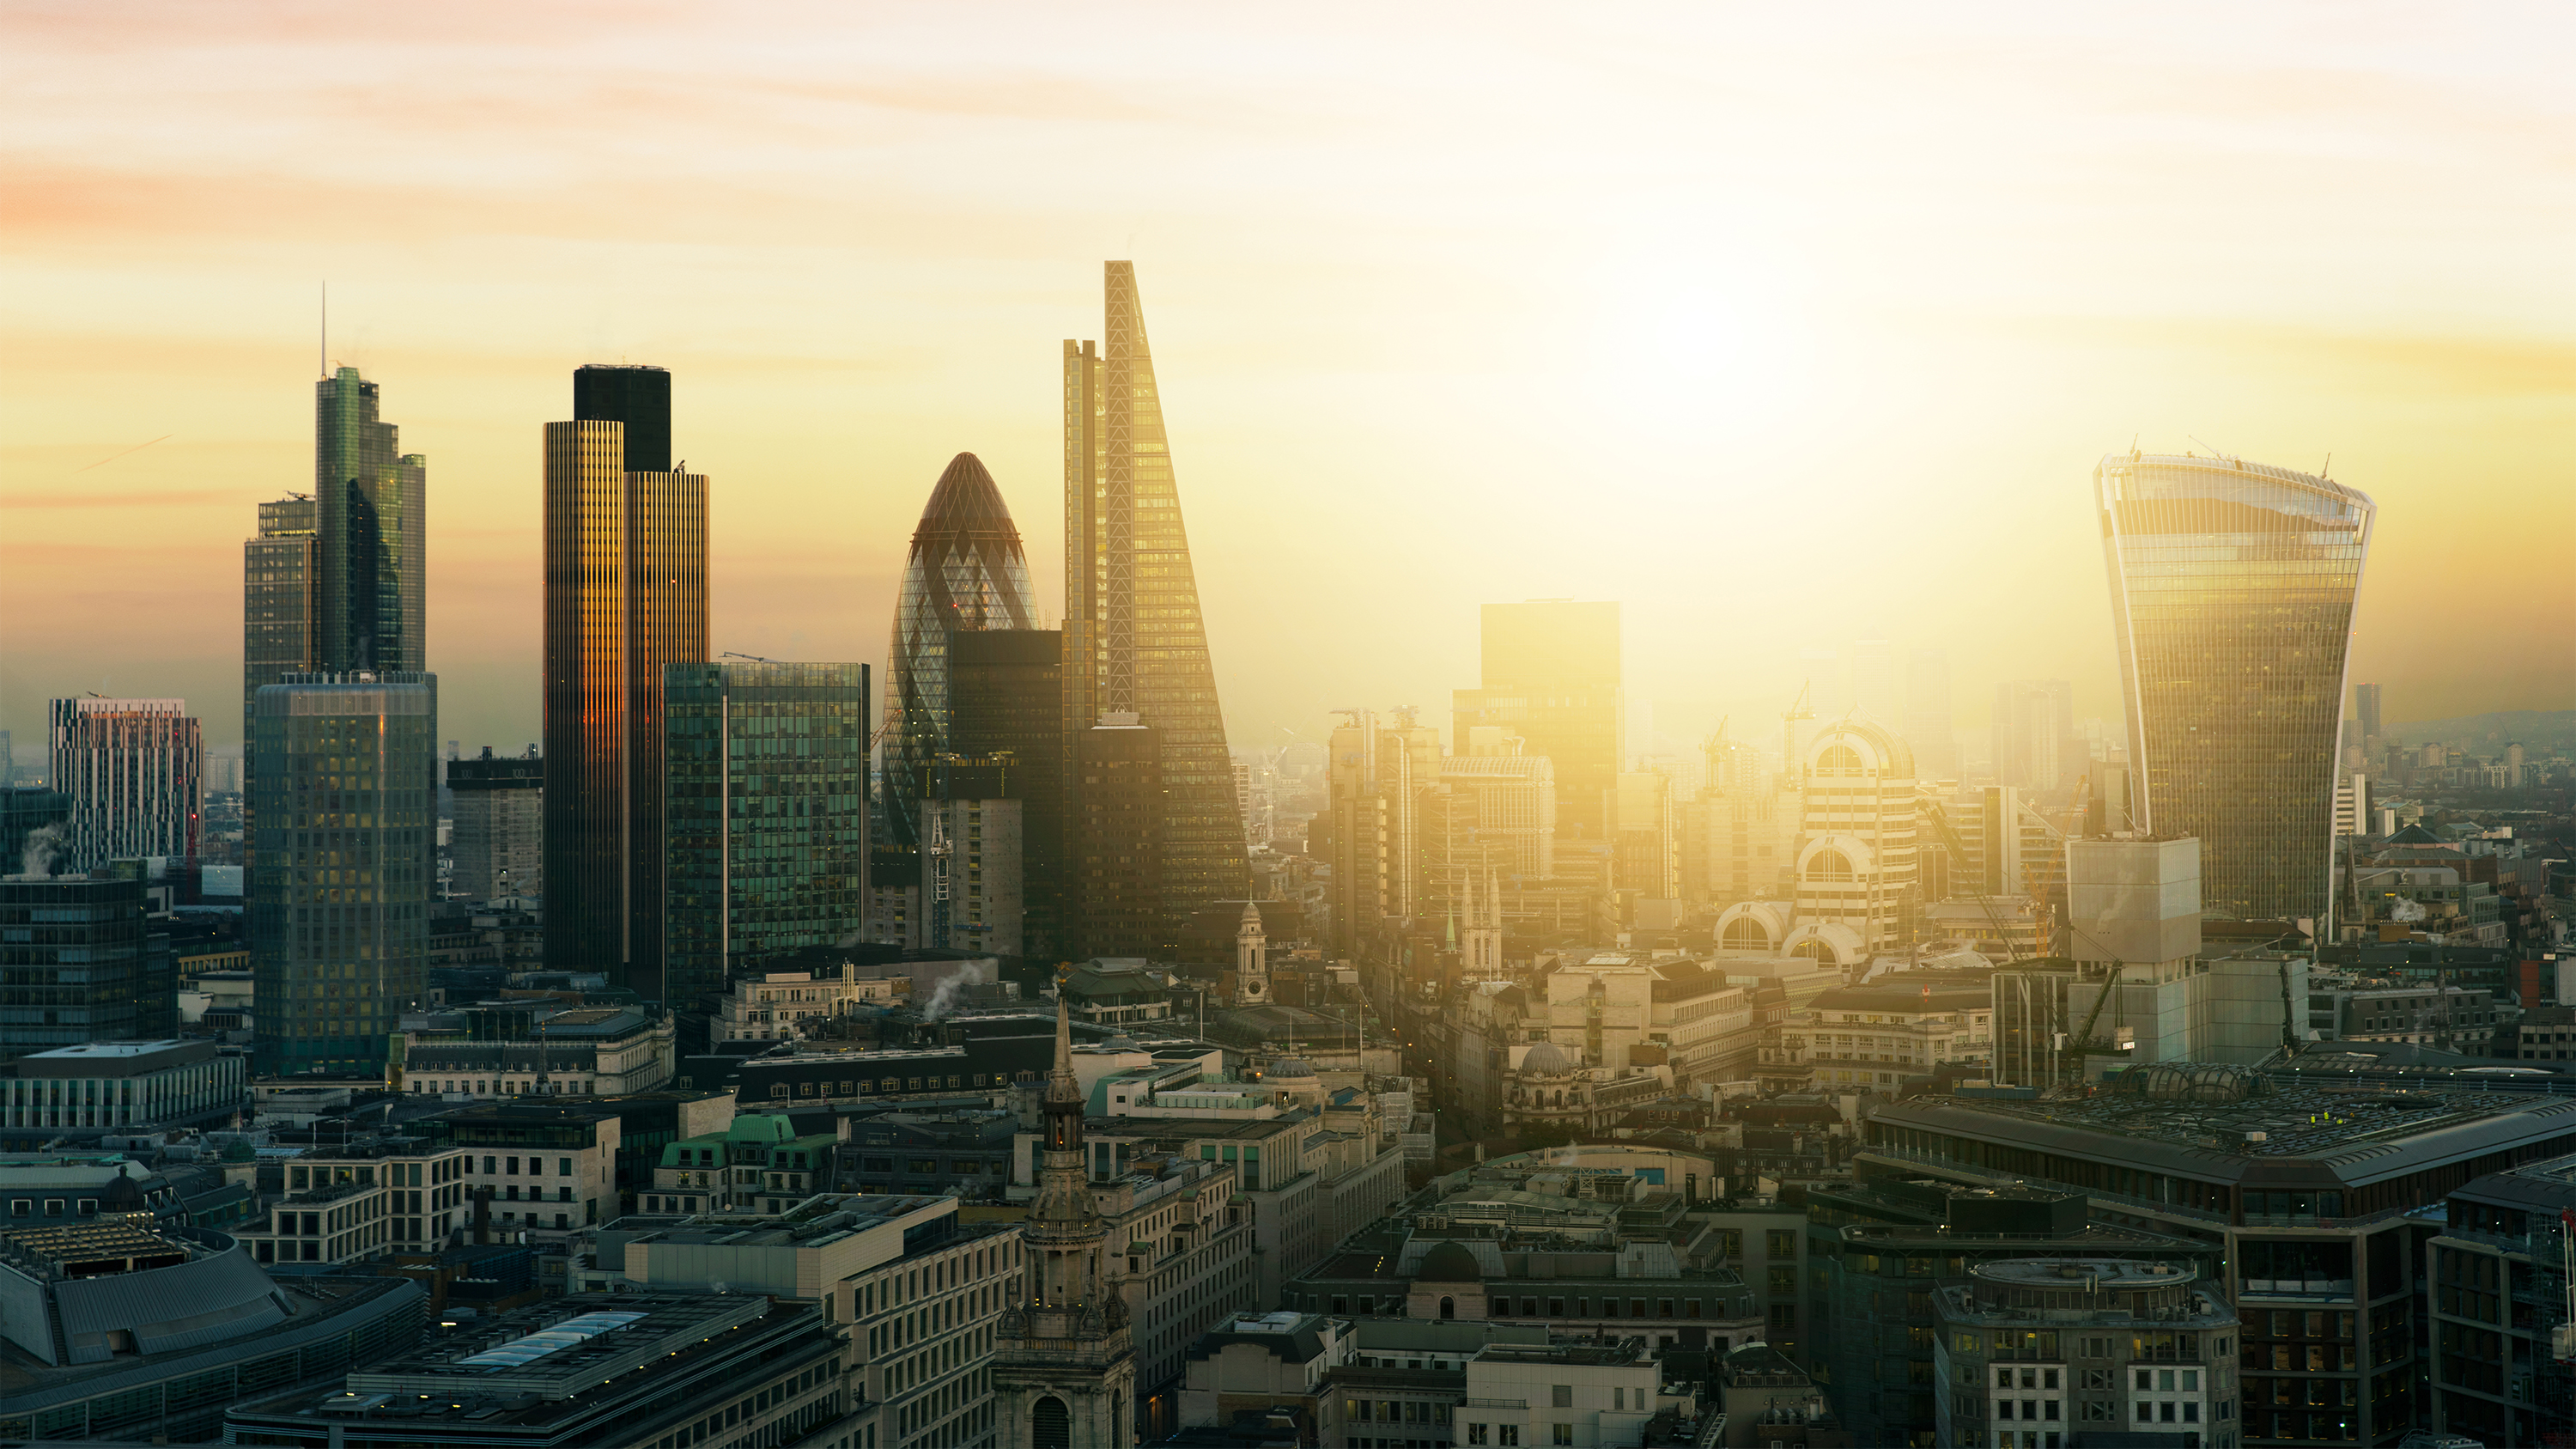 A cityscape image of the city of London, with the sun low in the sky